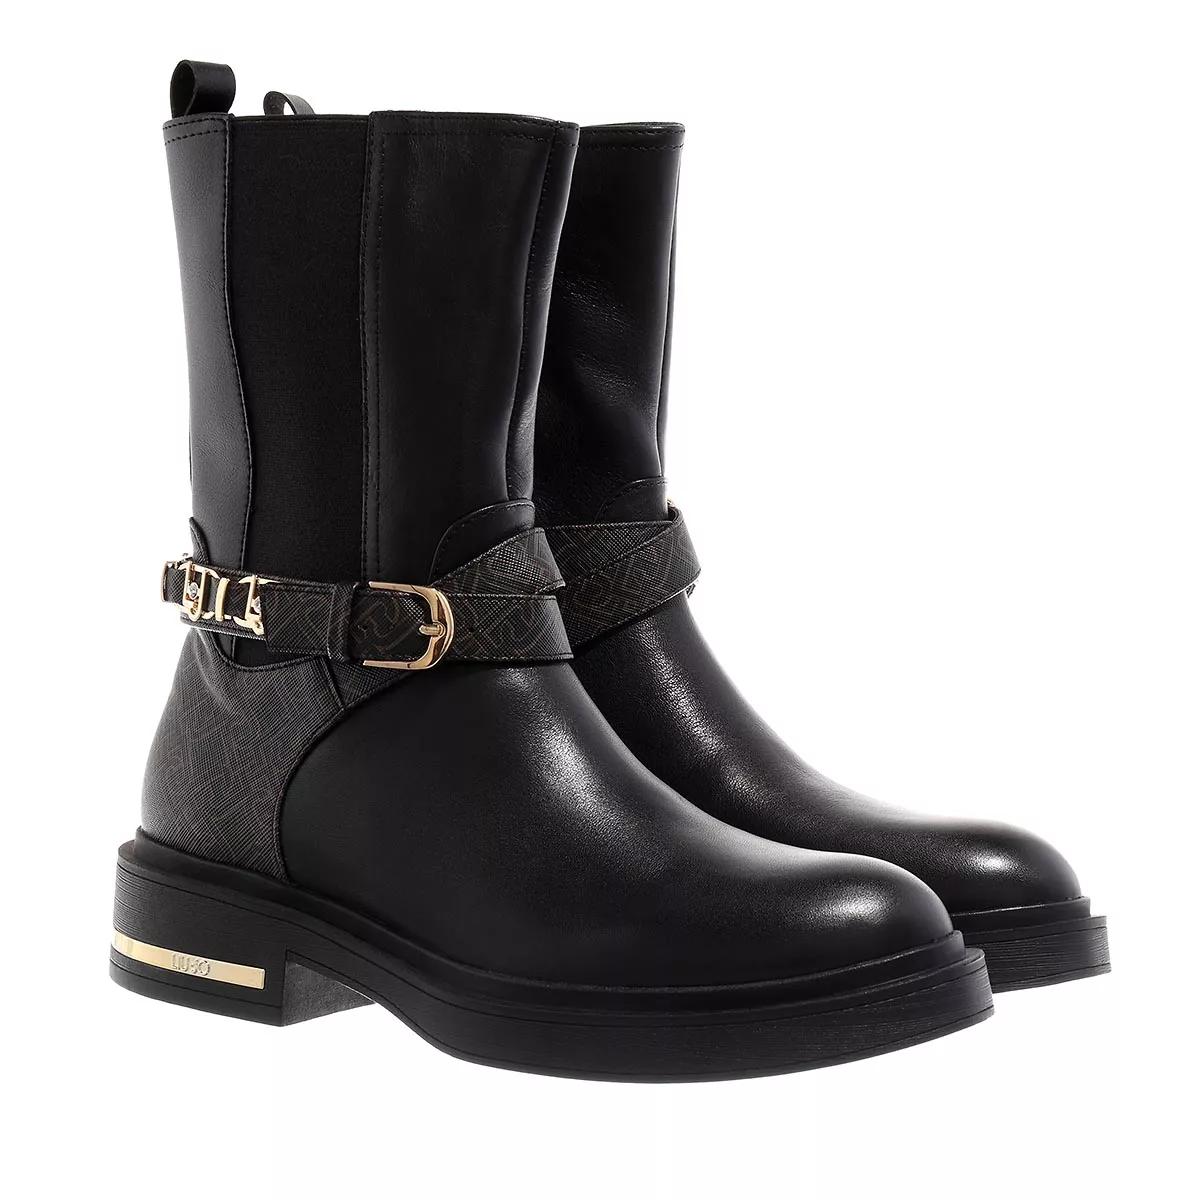 LIU JO Gabrielle 01 - Ankle Boot Black/Brown | Ankle Boot